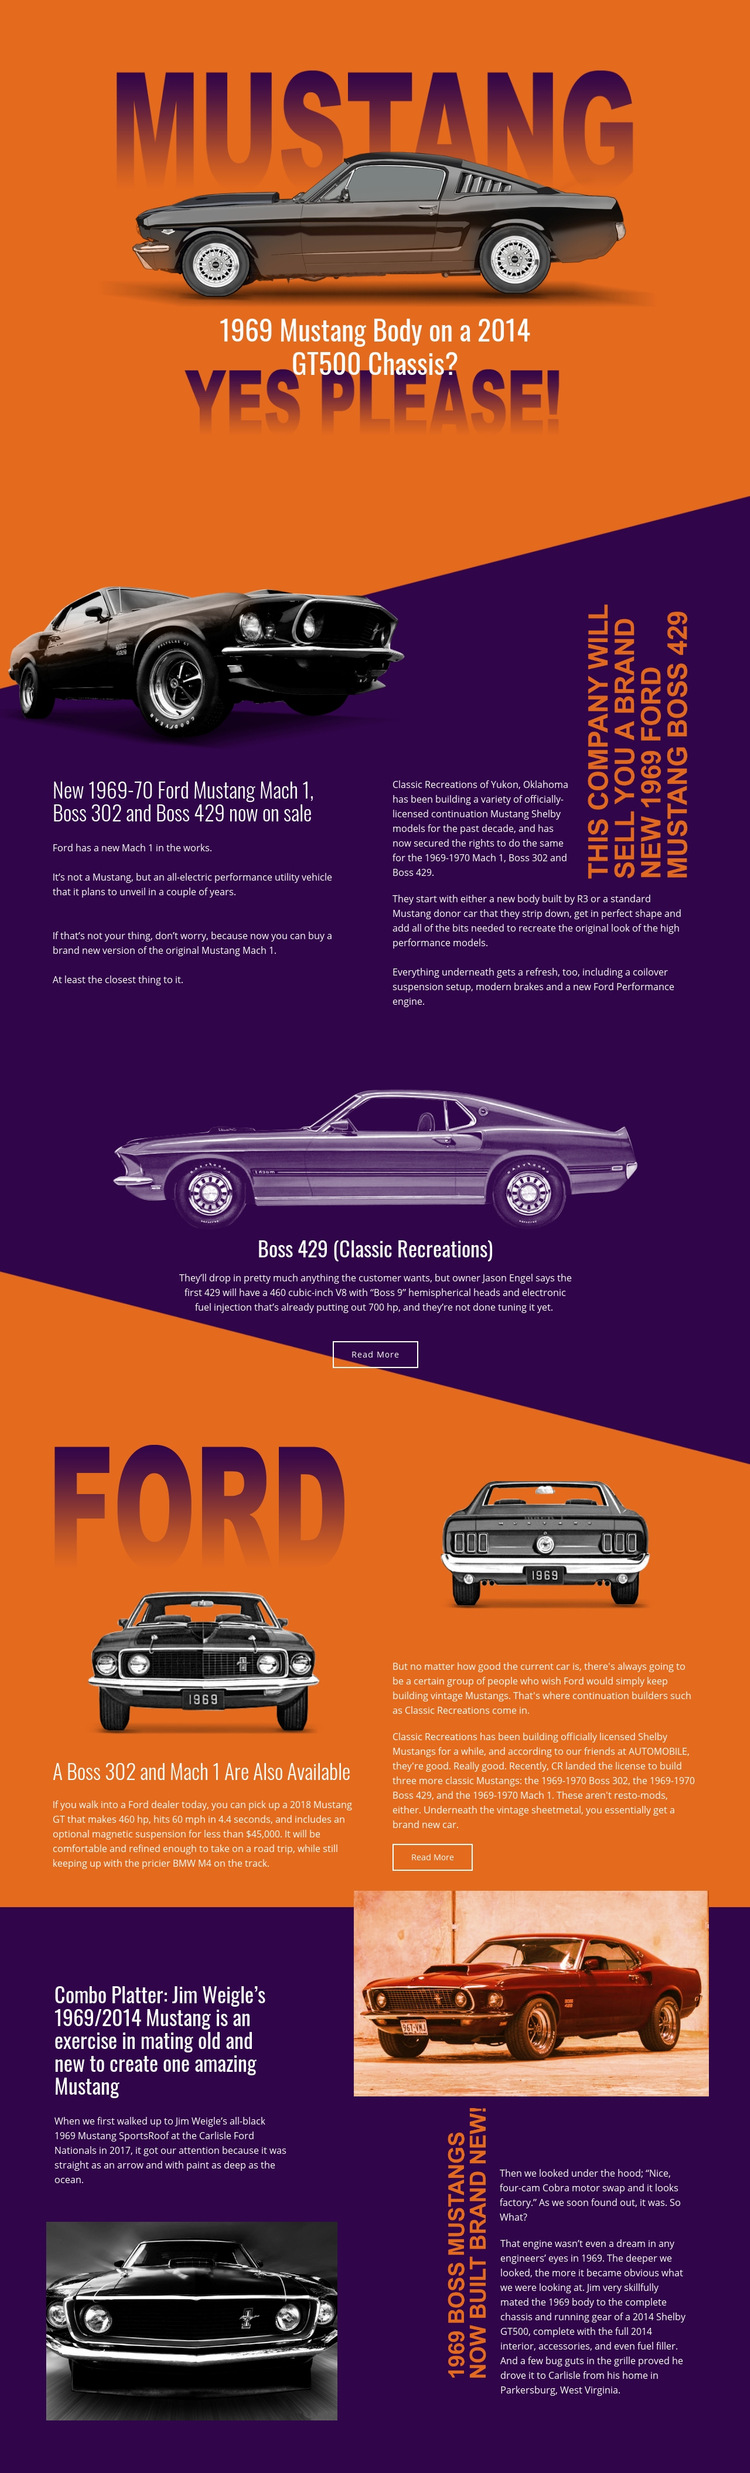 Mustang Web Page Design